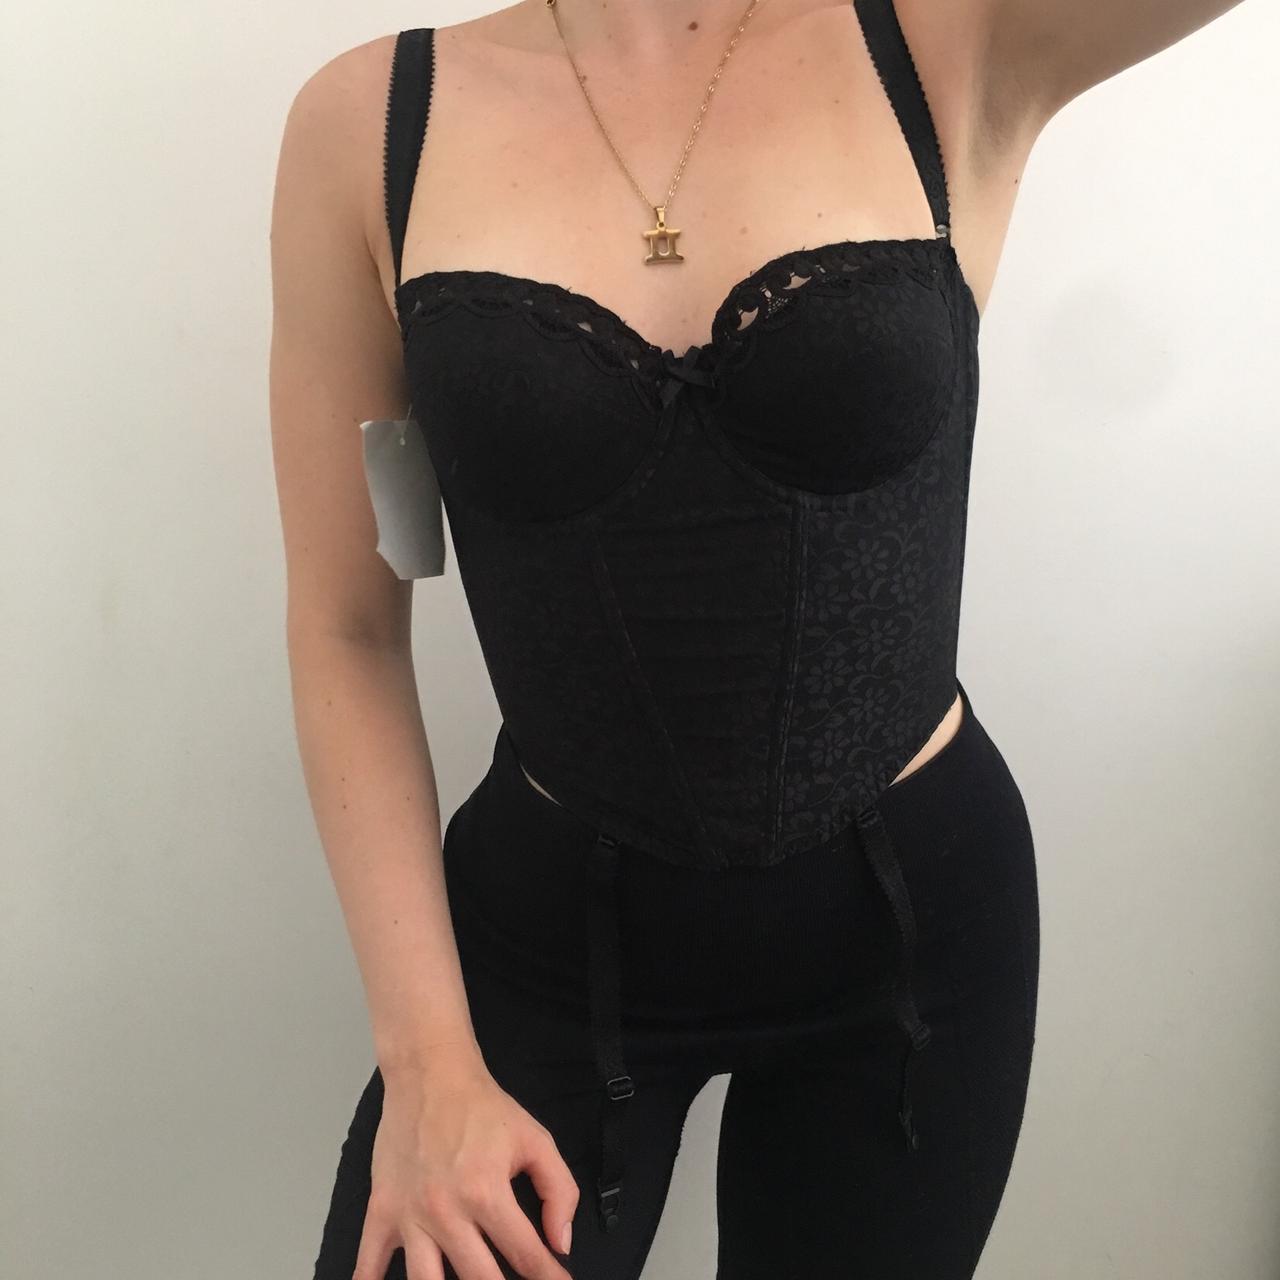 Vintage 90s black corset top with boned structure.